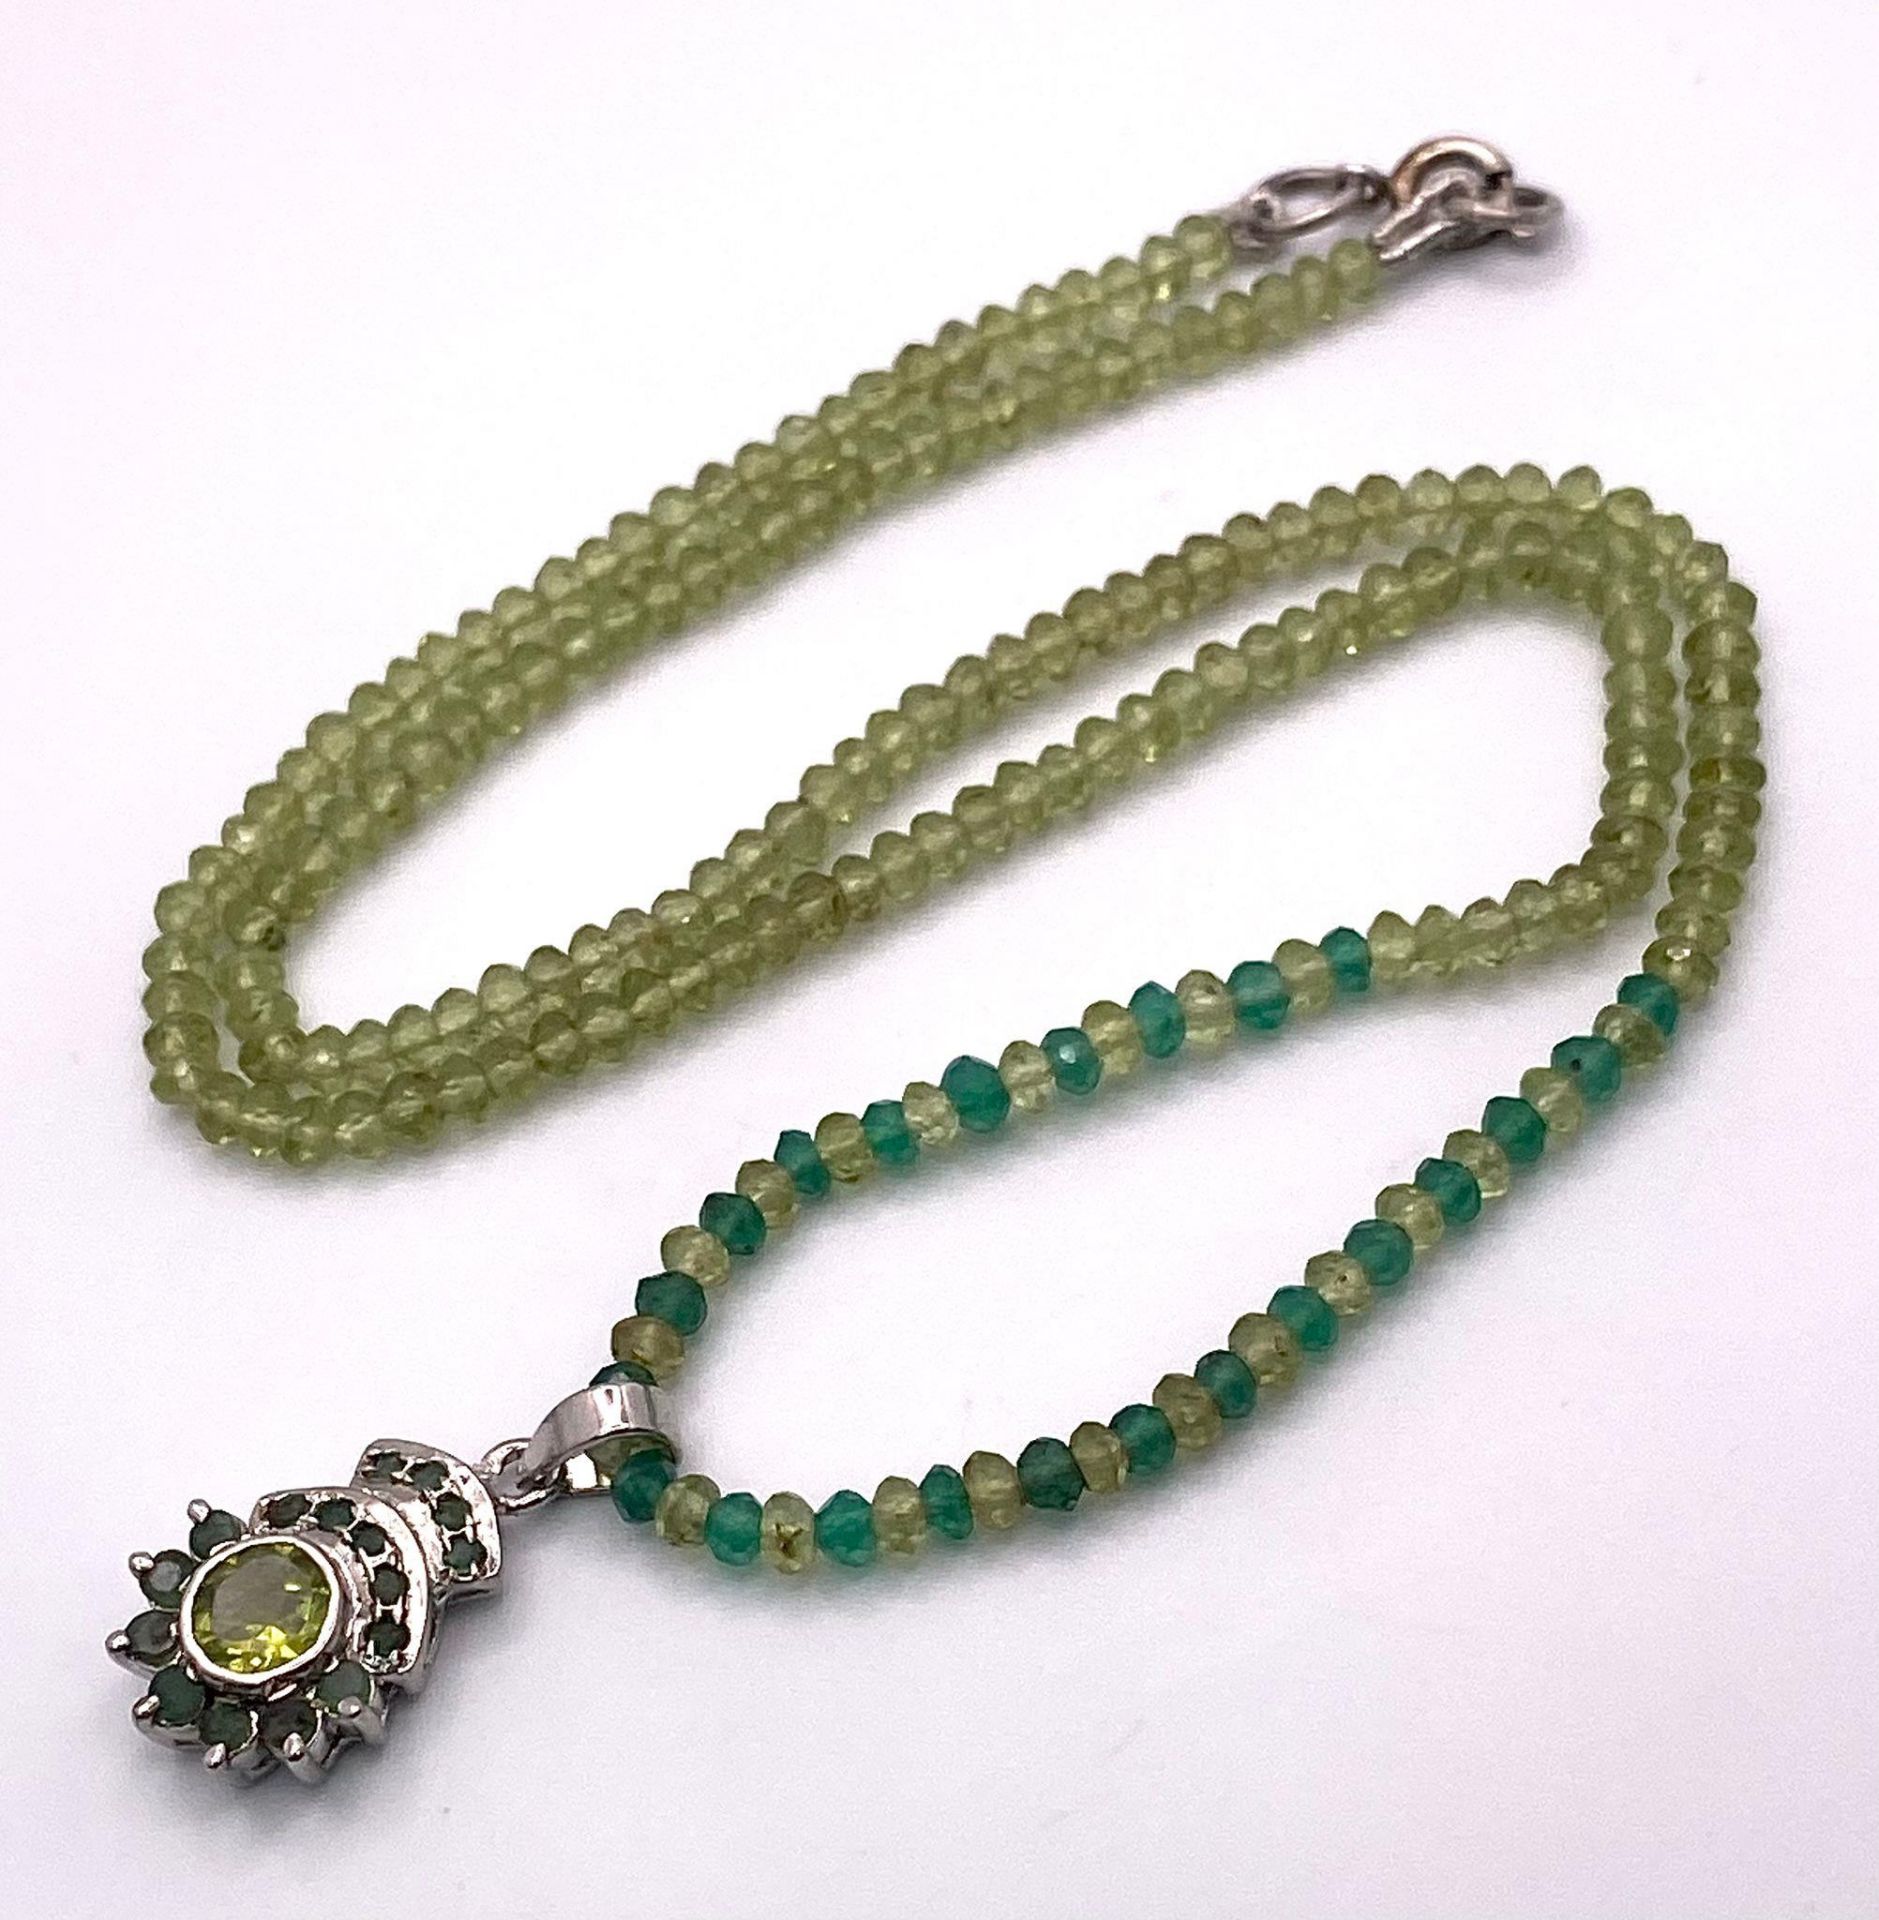 A Peridot & Green Onyx Beaded Necklace with Pendant drop Plus a Pair of Peridot Earrings. Set in 925 - Image 2 of 4